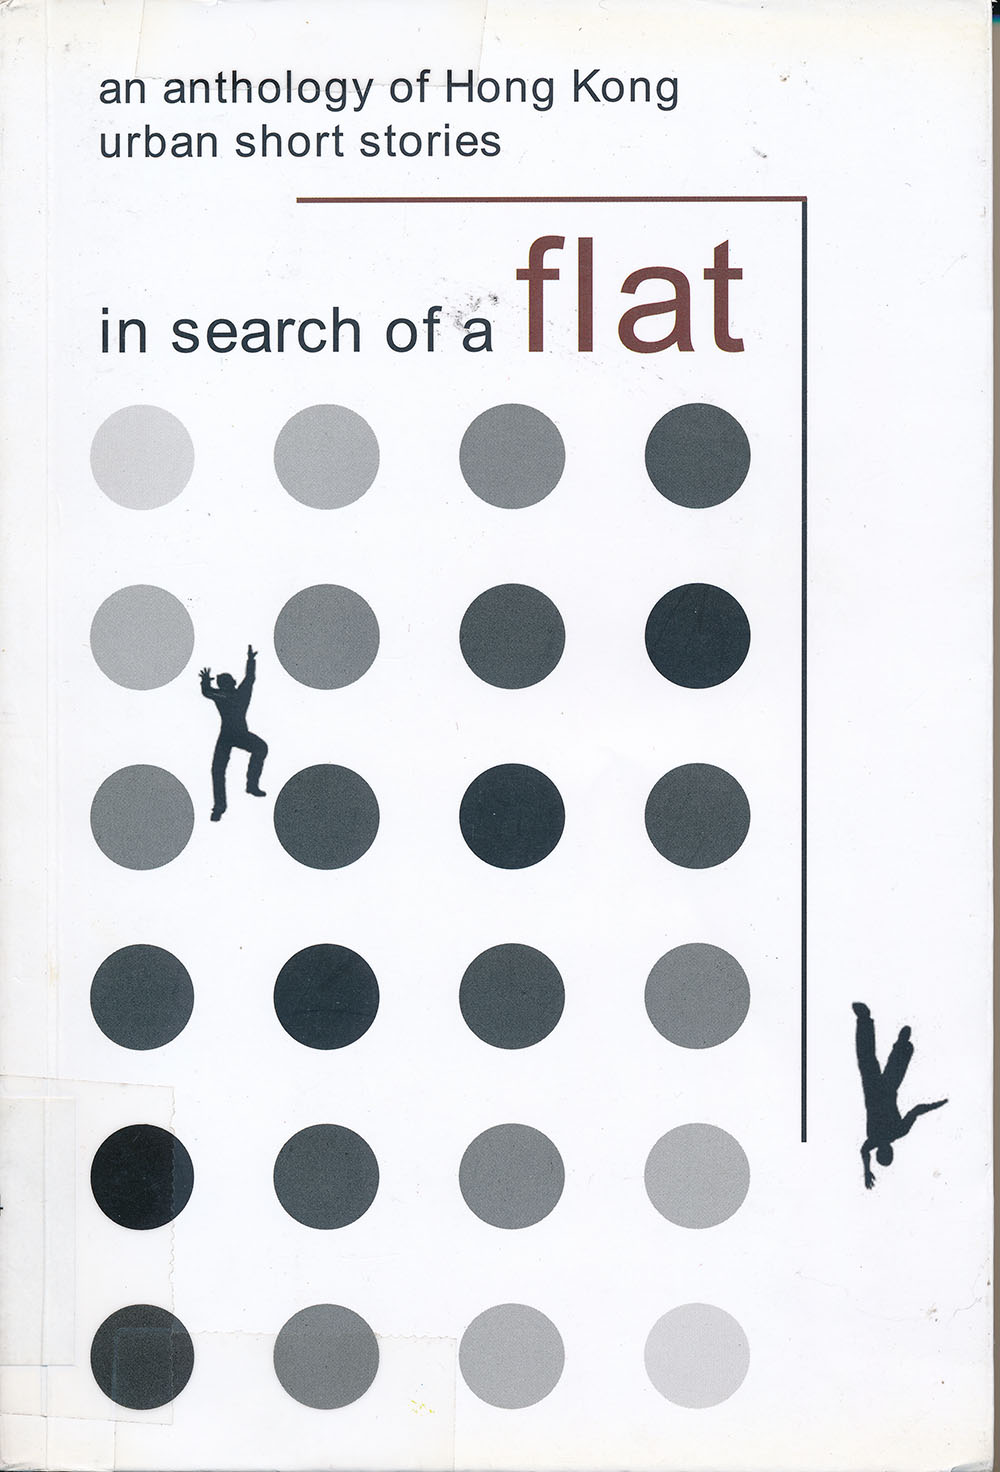 In Search of a Flat: An Anthology of Hong Kong Urban Short Stories